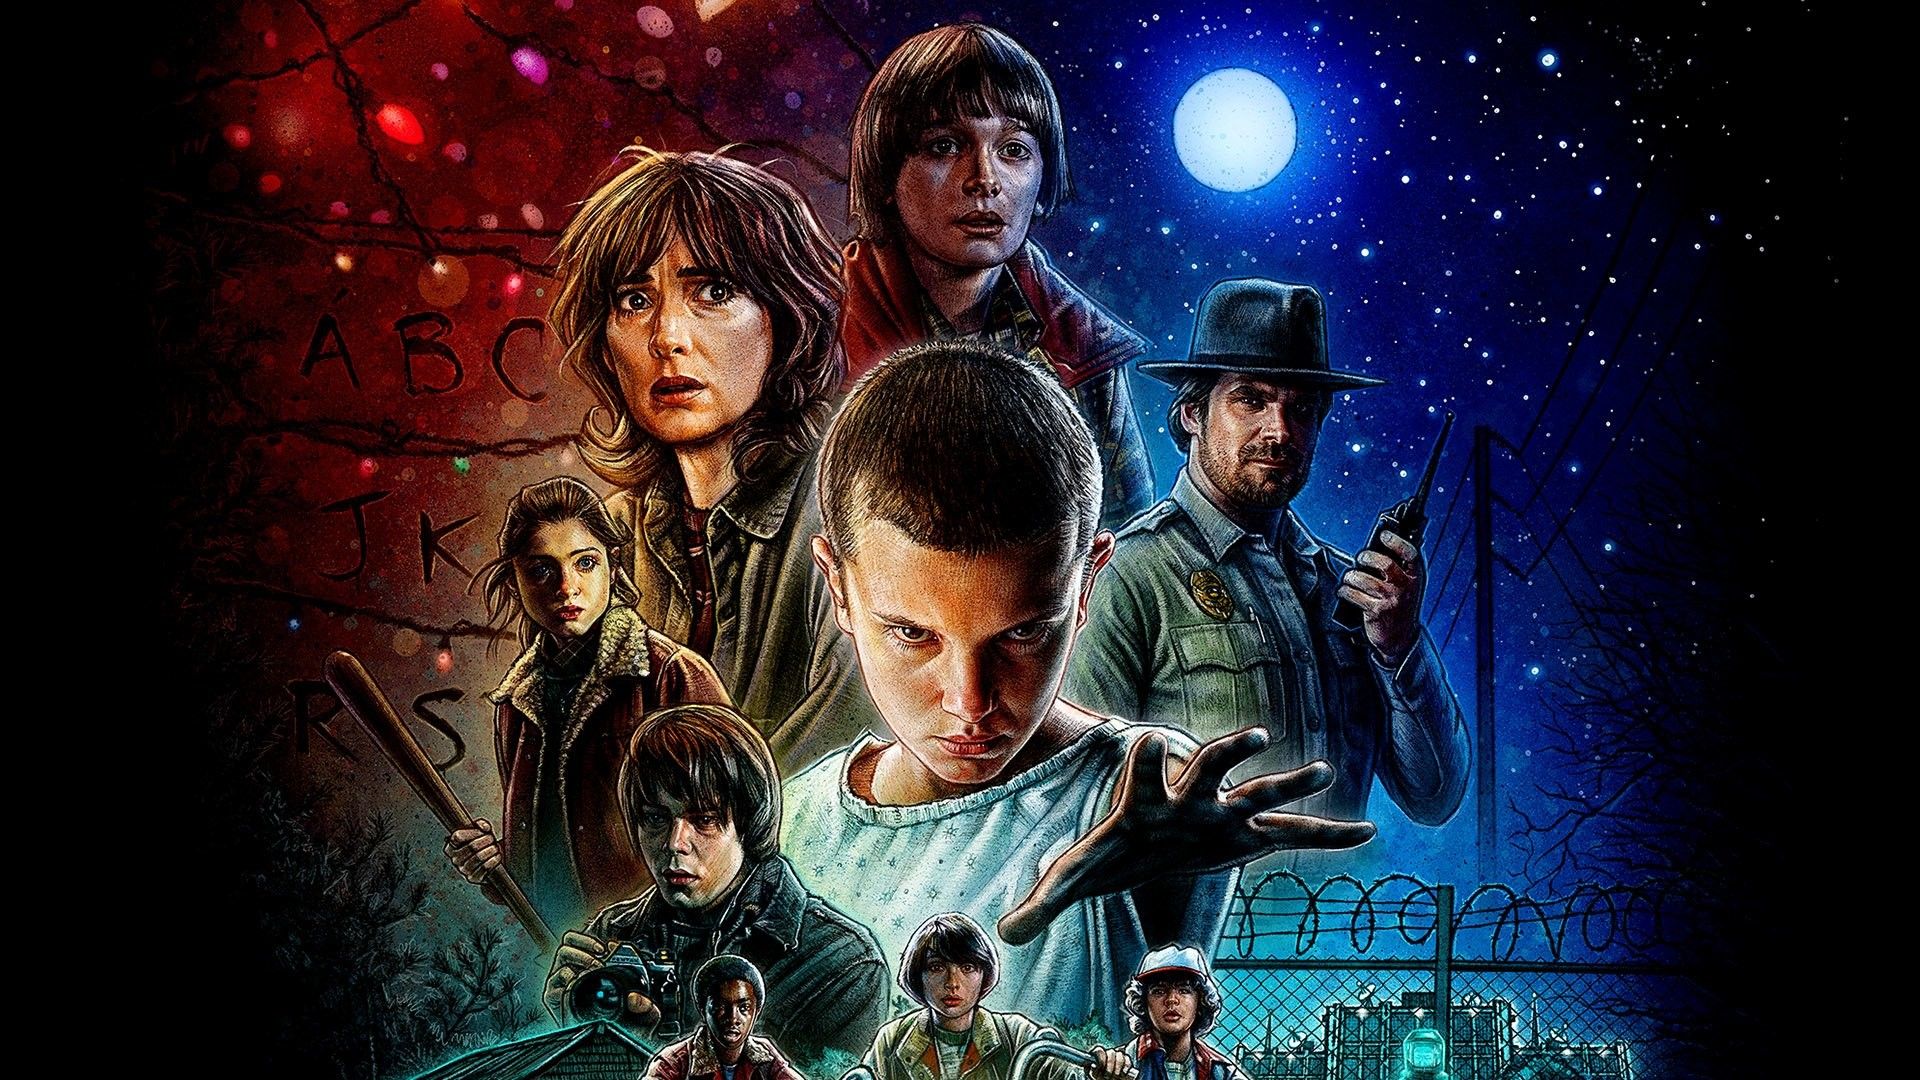 2932x2932 Stranger Things Creative Logo 4k Ipad Pro Retina Display HD 4k  Wallpapers, Images, Backgrounds, Photos and Pictures